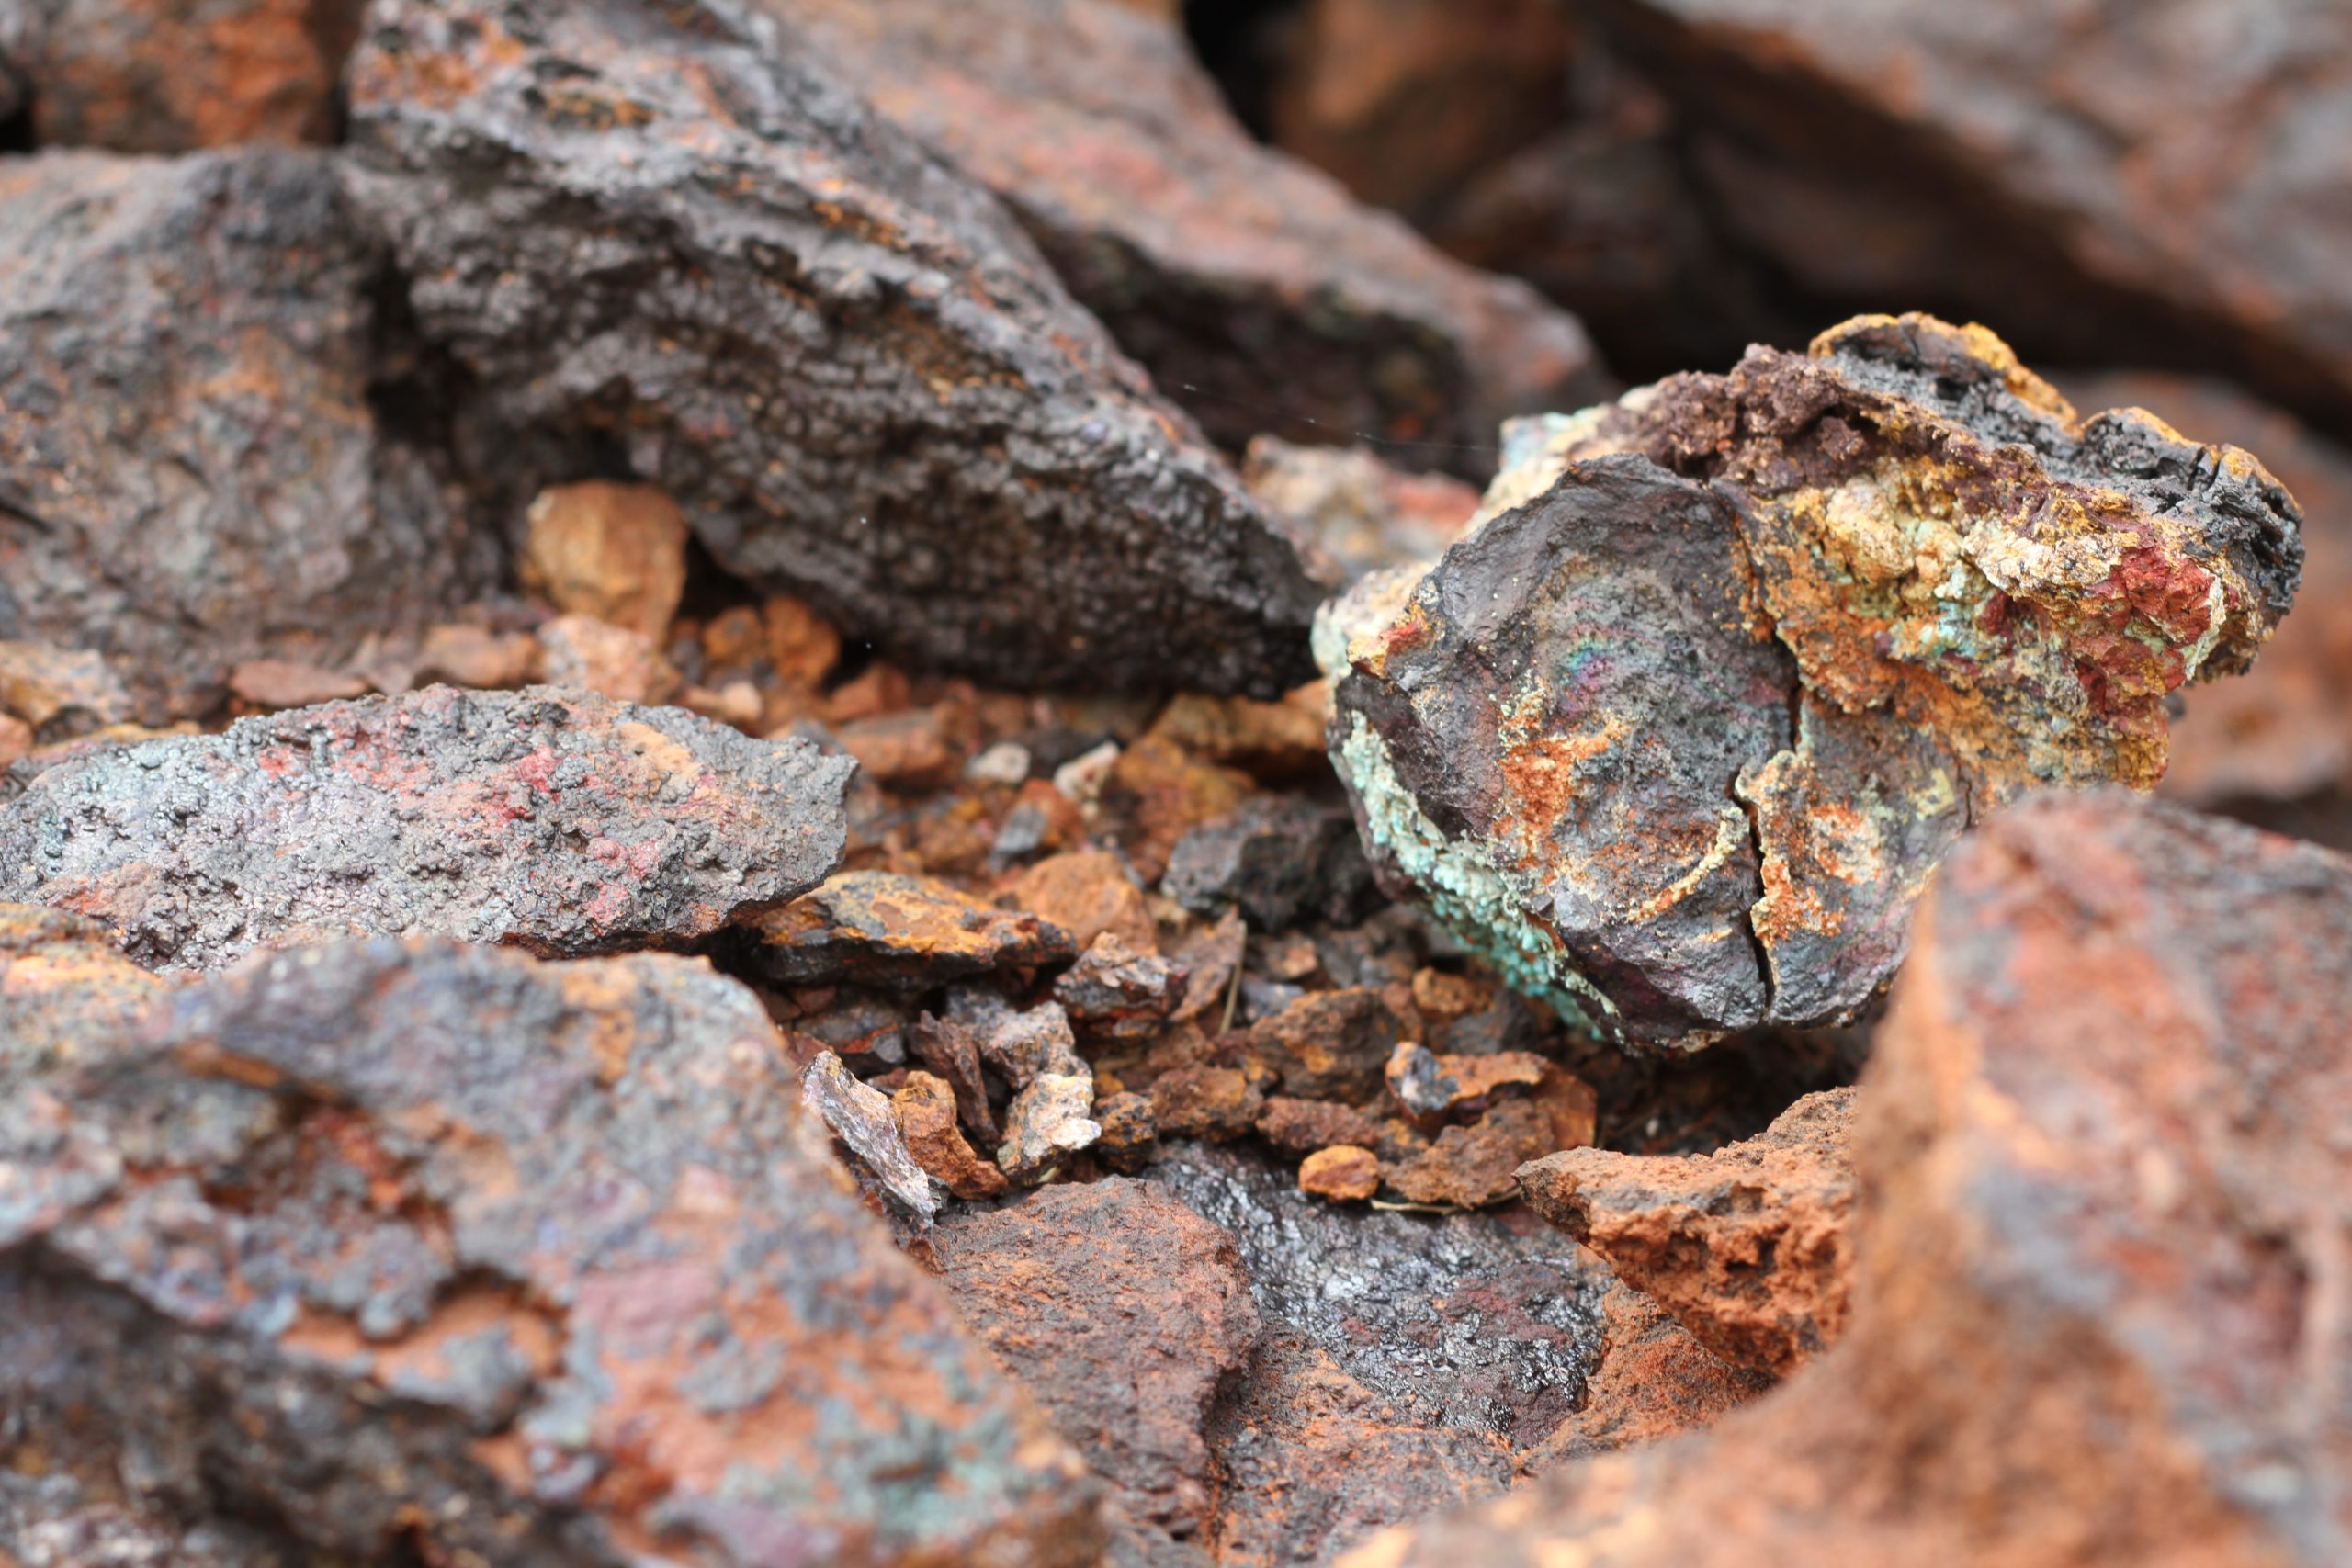 Dark grey solid rock of ore with colours of orange, brown, green and yellow is pictured.